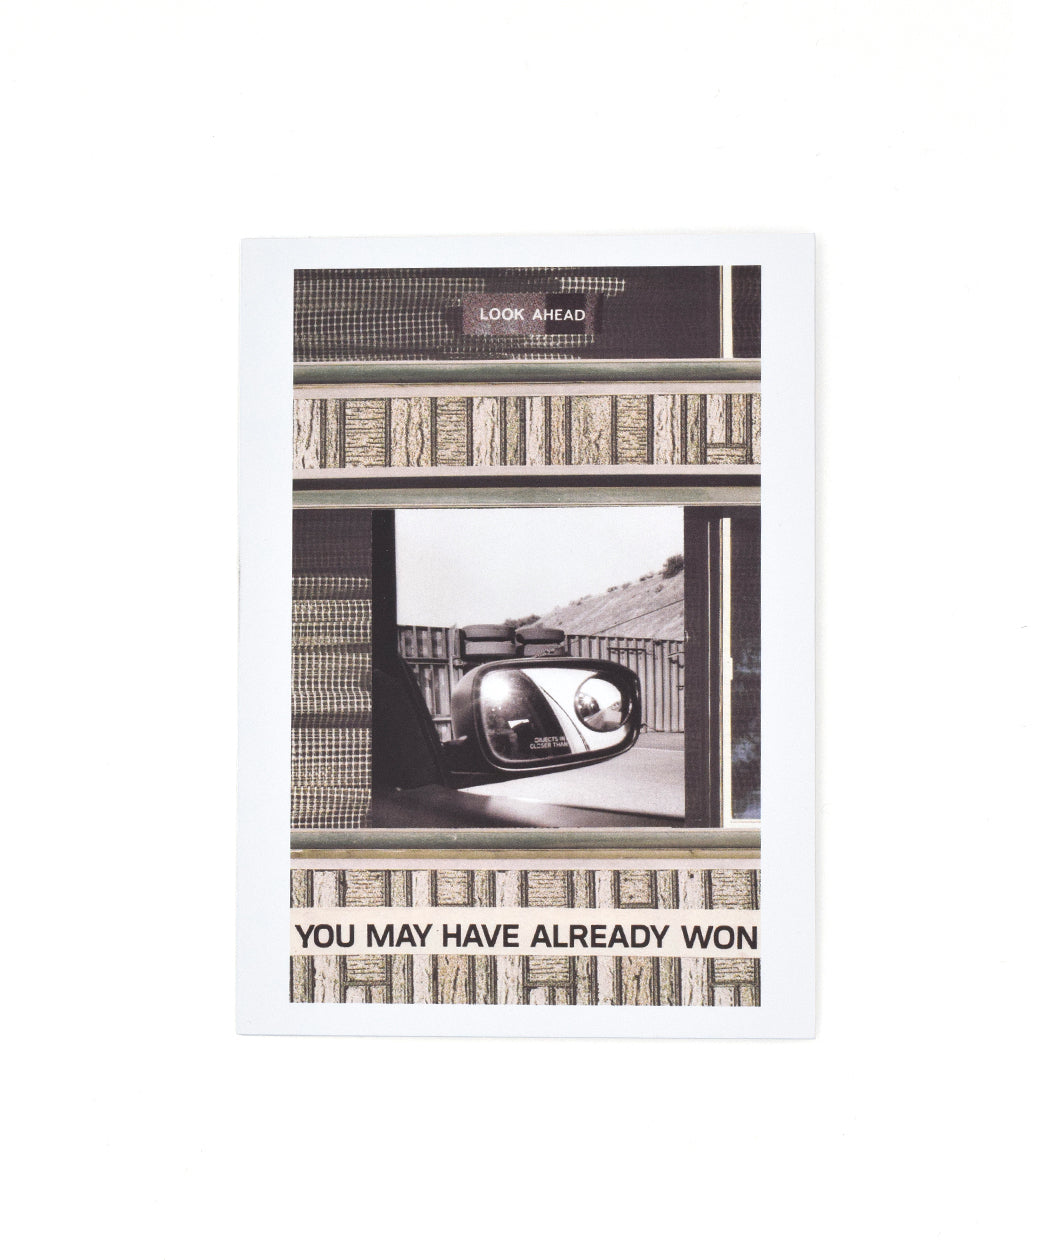 A white greeting card with a black and white image a car mirror with a fence and hill in the background. Textured designs are all around the image. “Look ahead” is in white sans serif font at the top. “You may have already won” in black sans serif font at the bottom - from the Art Assignment